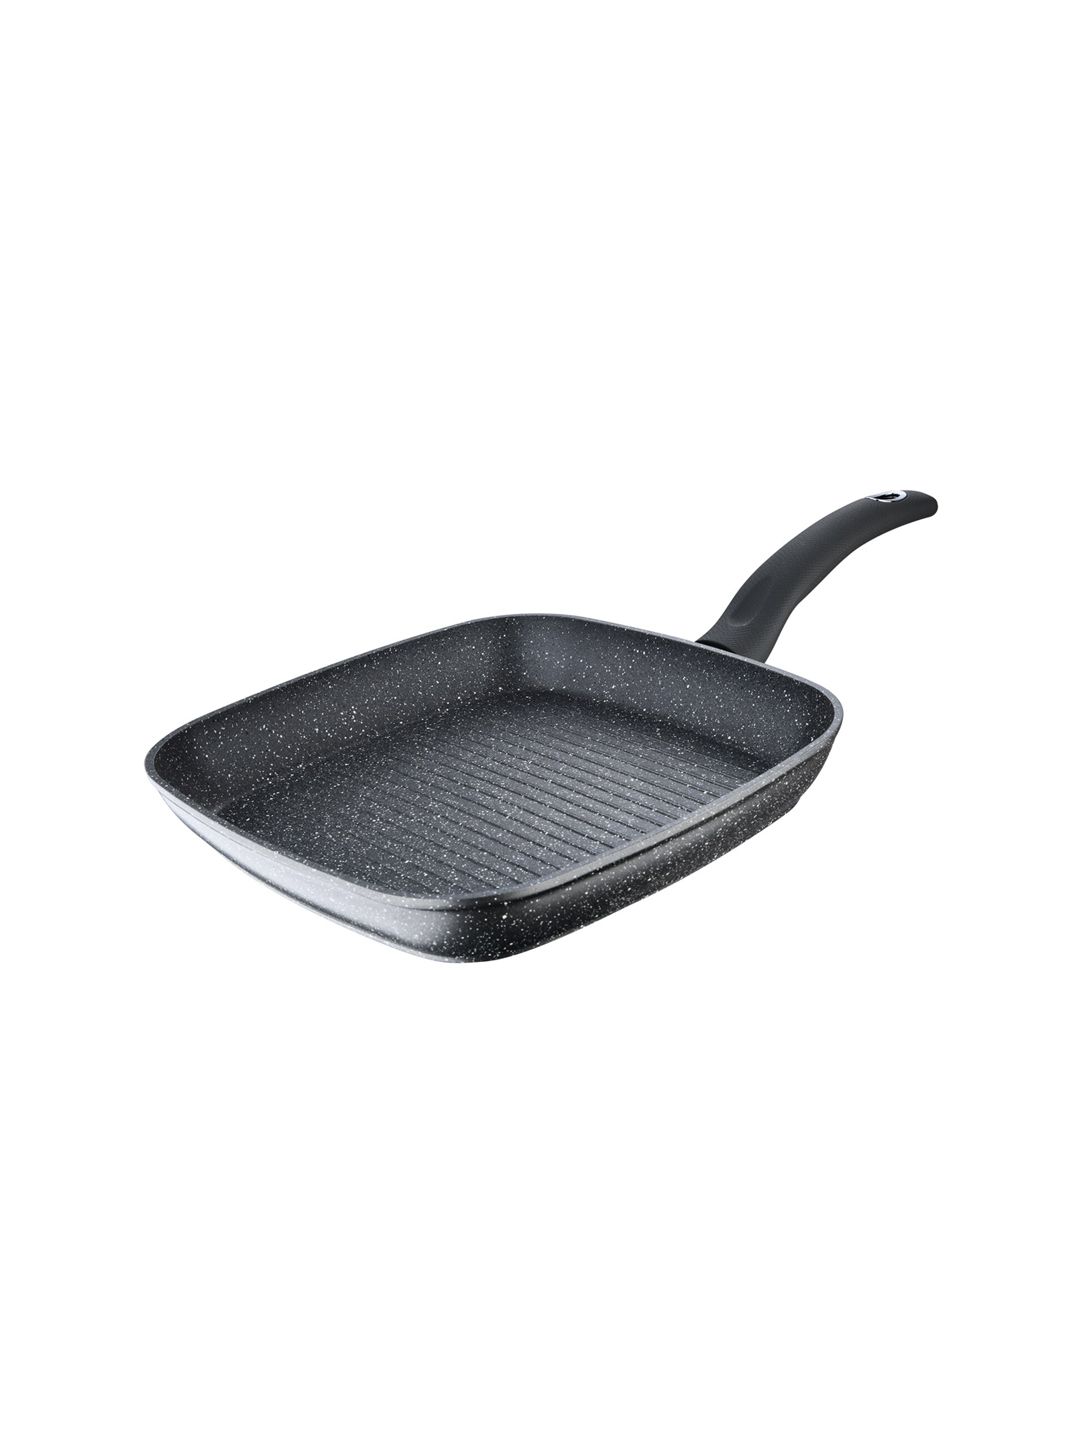 BERGNER Grey Solid Non-Stick Grill Pan Price in India